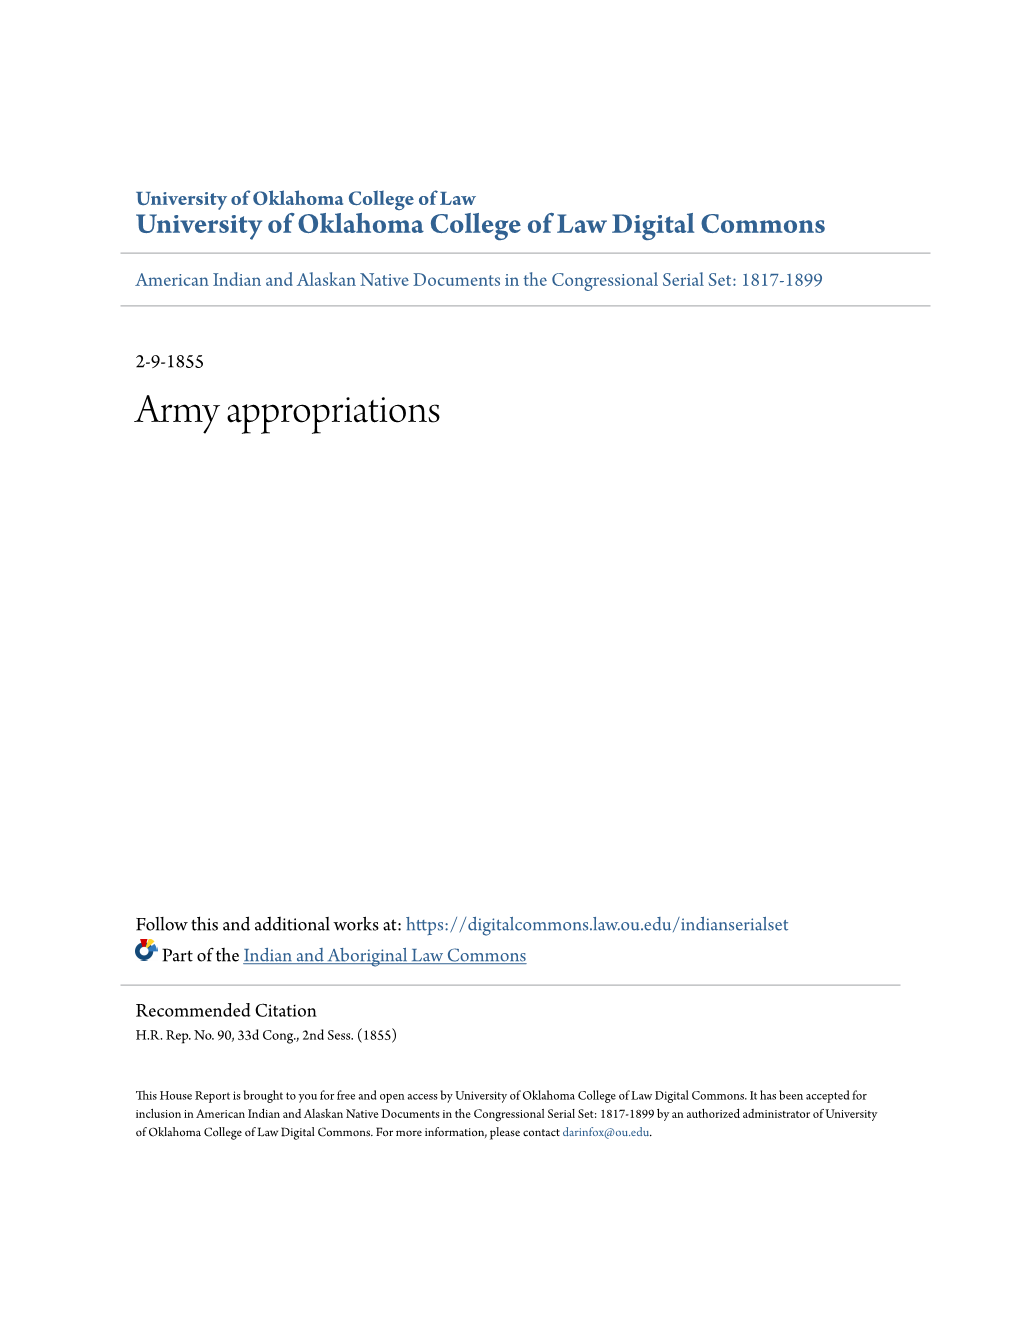 Army Appropriations